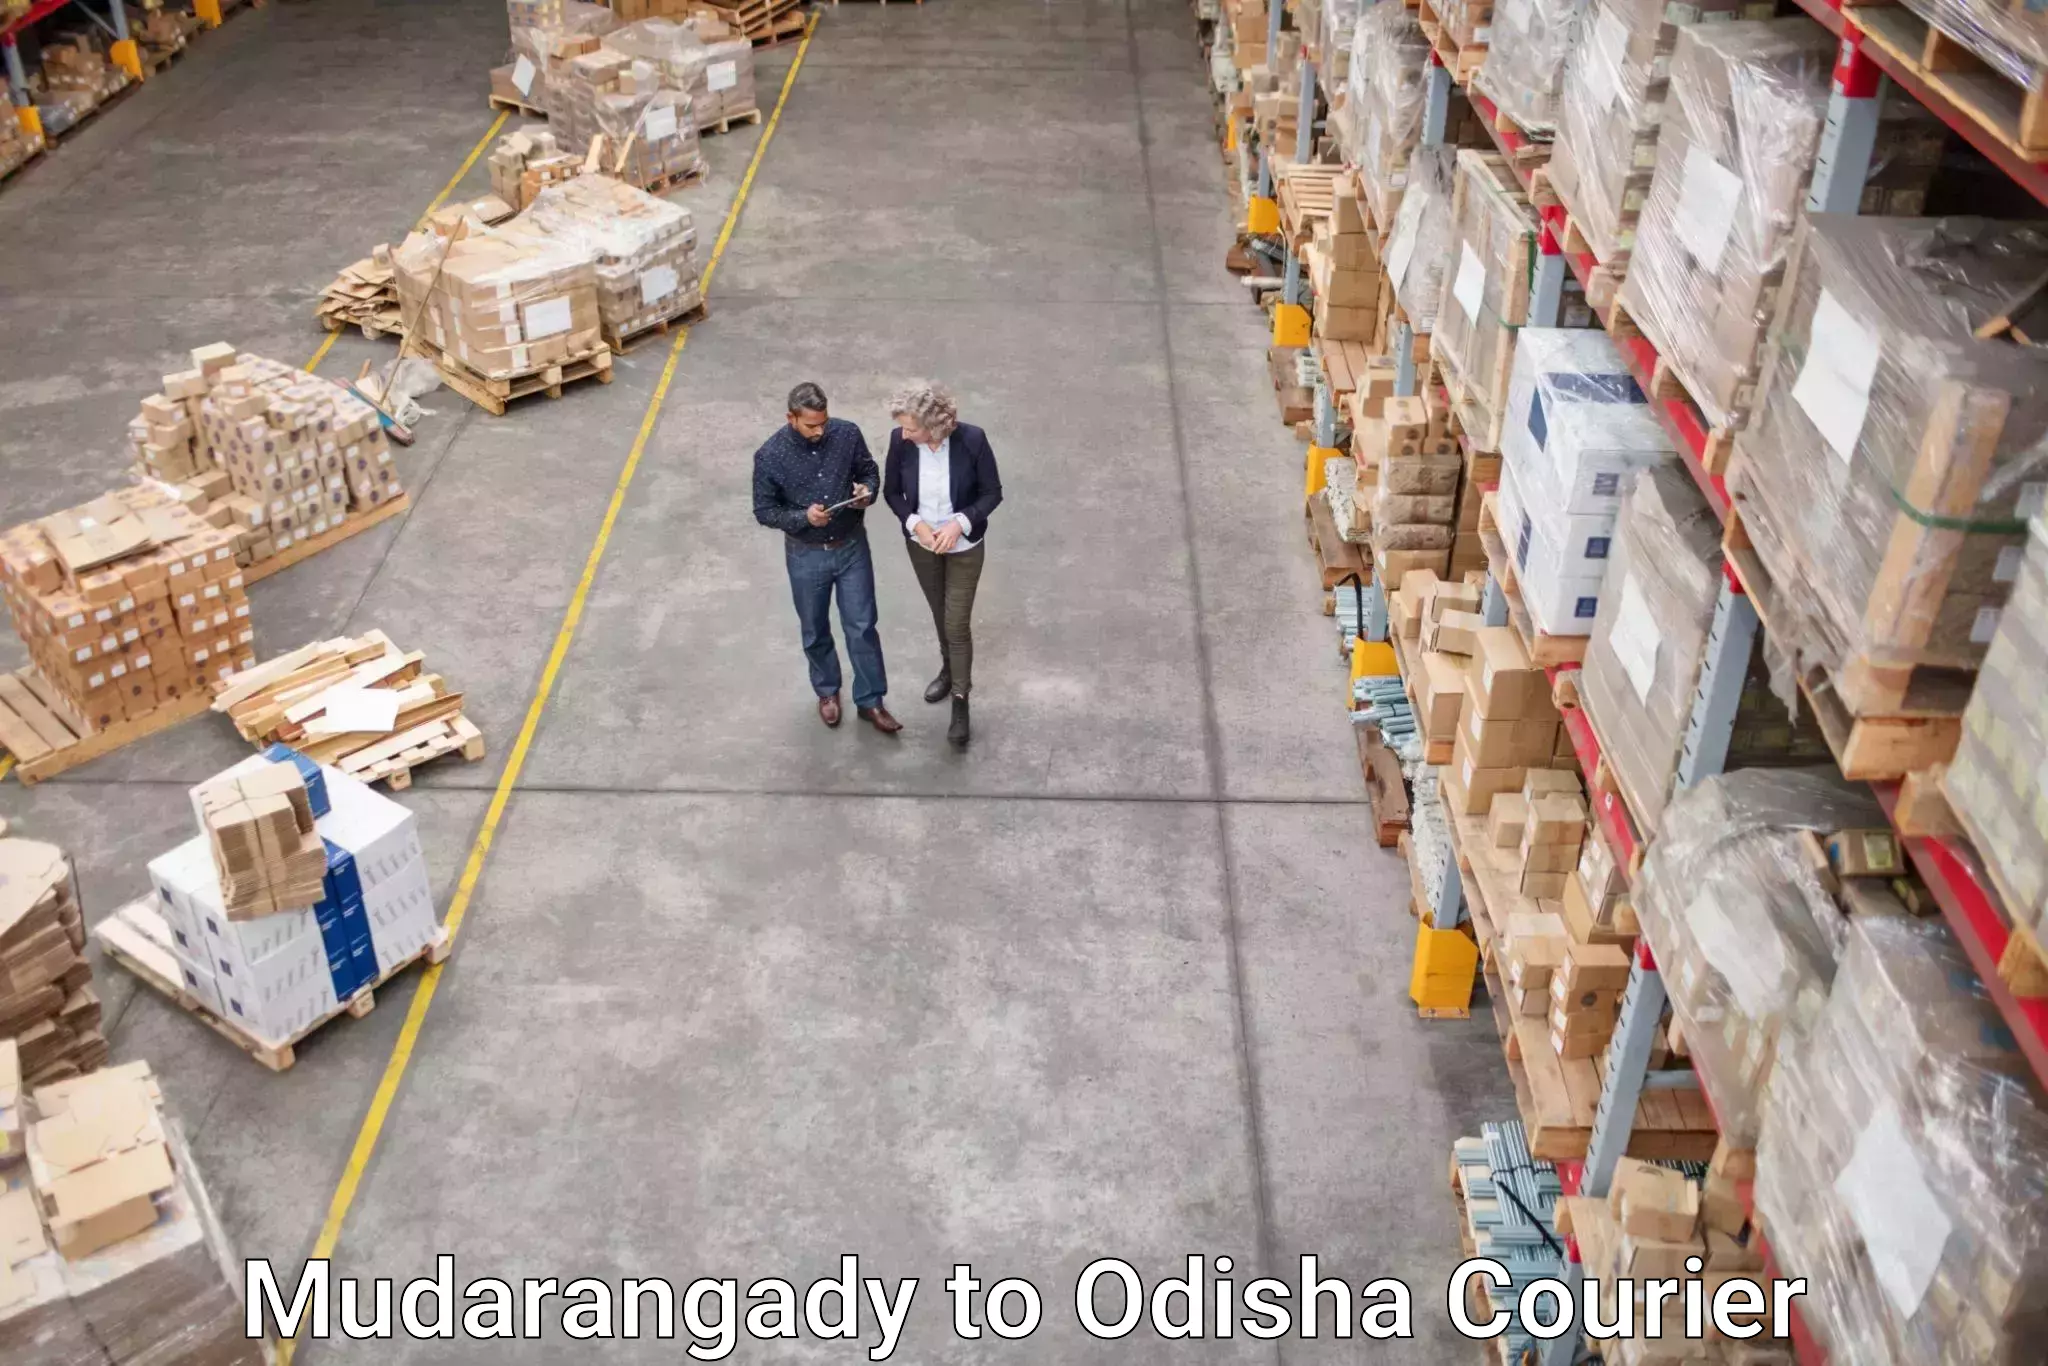 Express package transport in Mudarangady to Odisha